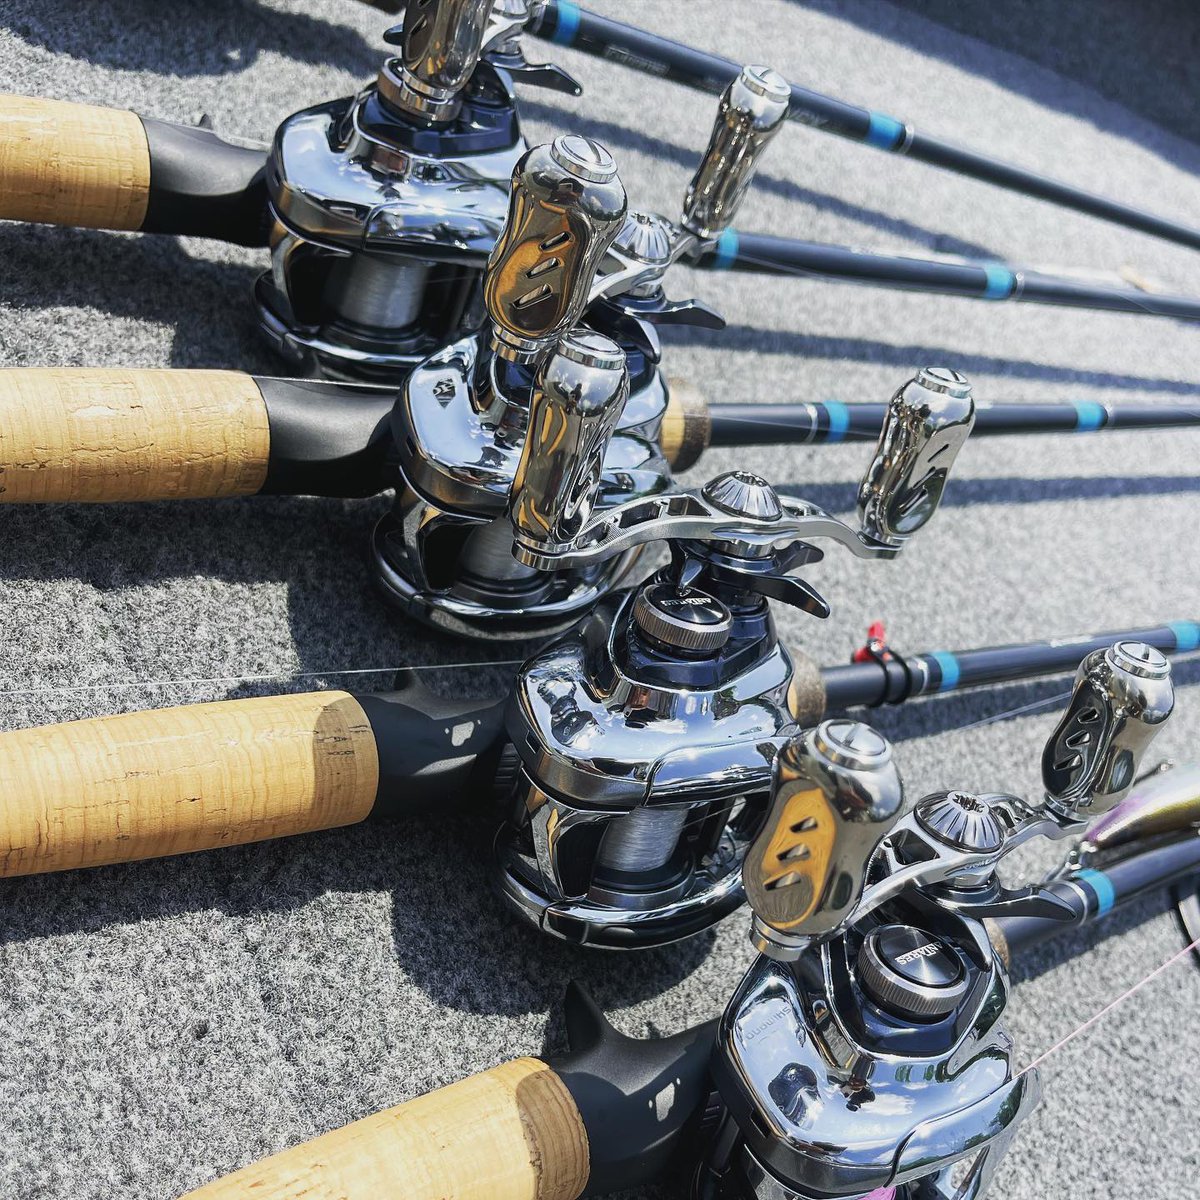 Fully loaded quiver. 

📸: @shimanoangler
#gomexus #FeelConnected #NRXplus #BassFishing #BassGear